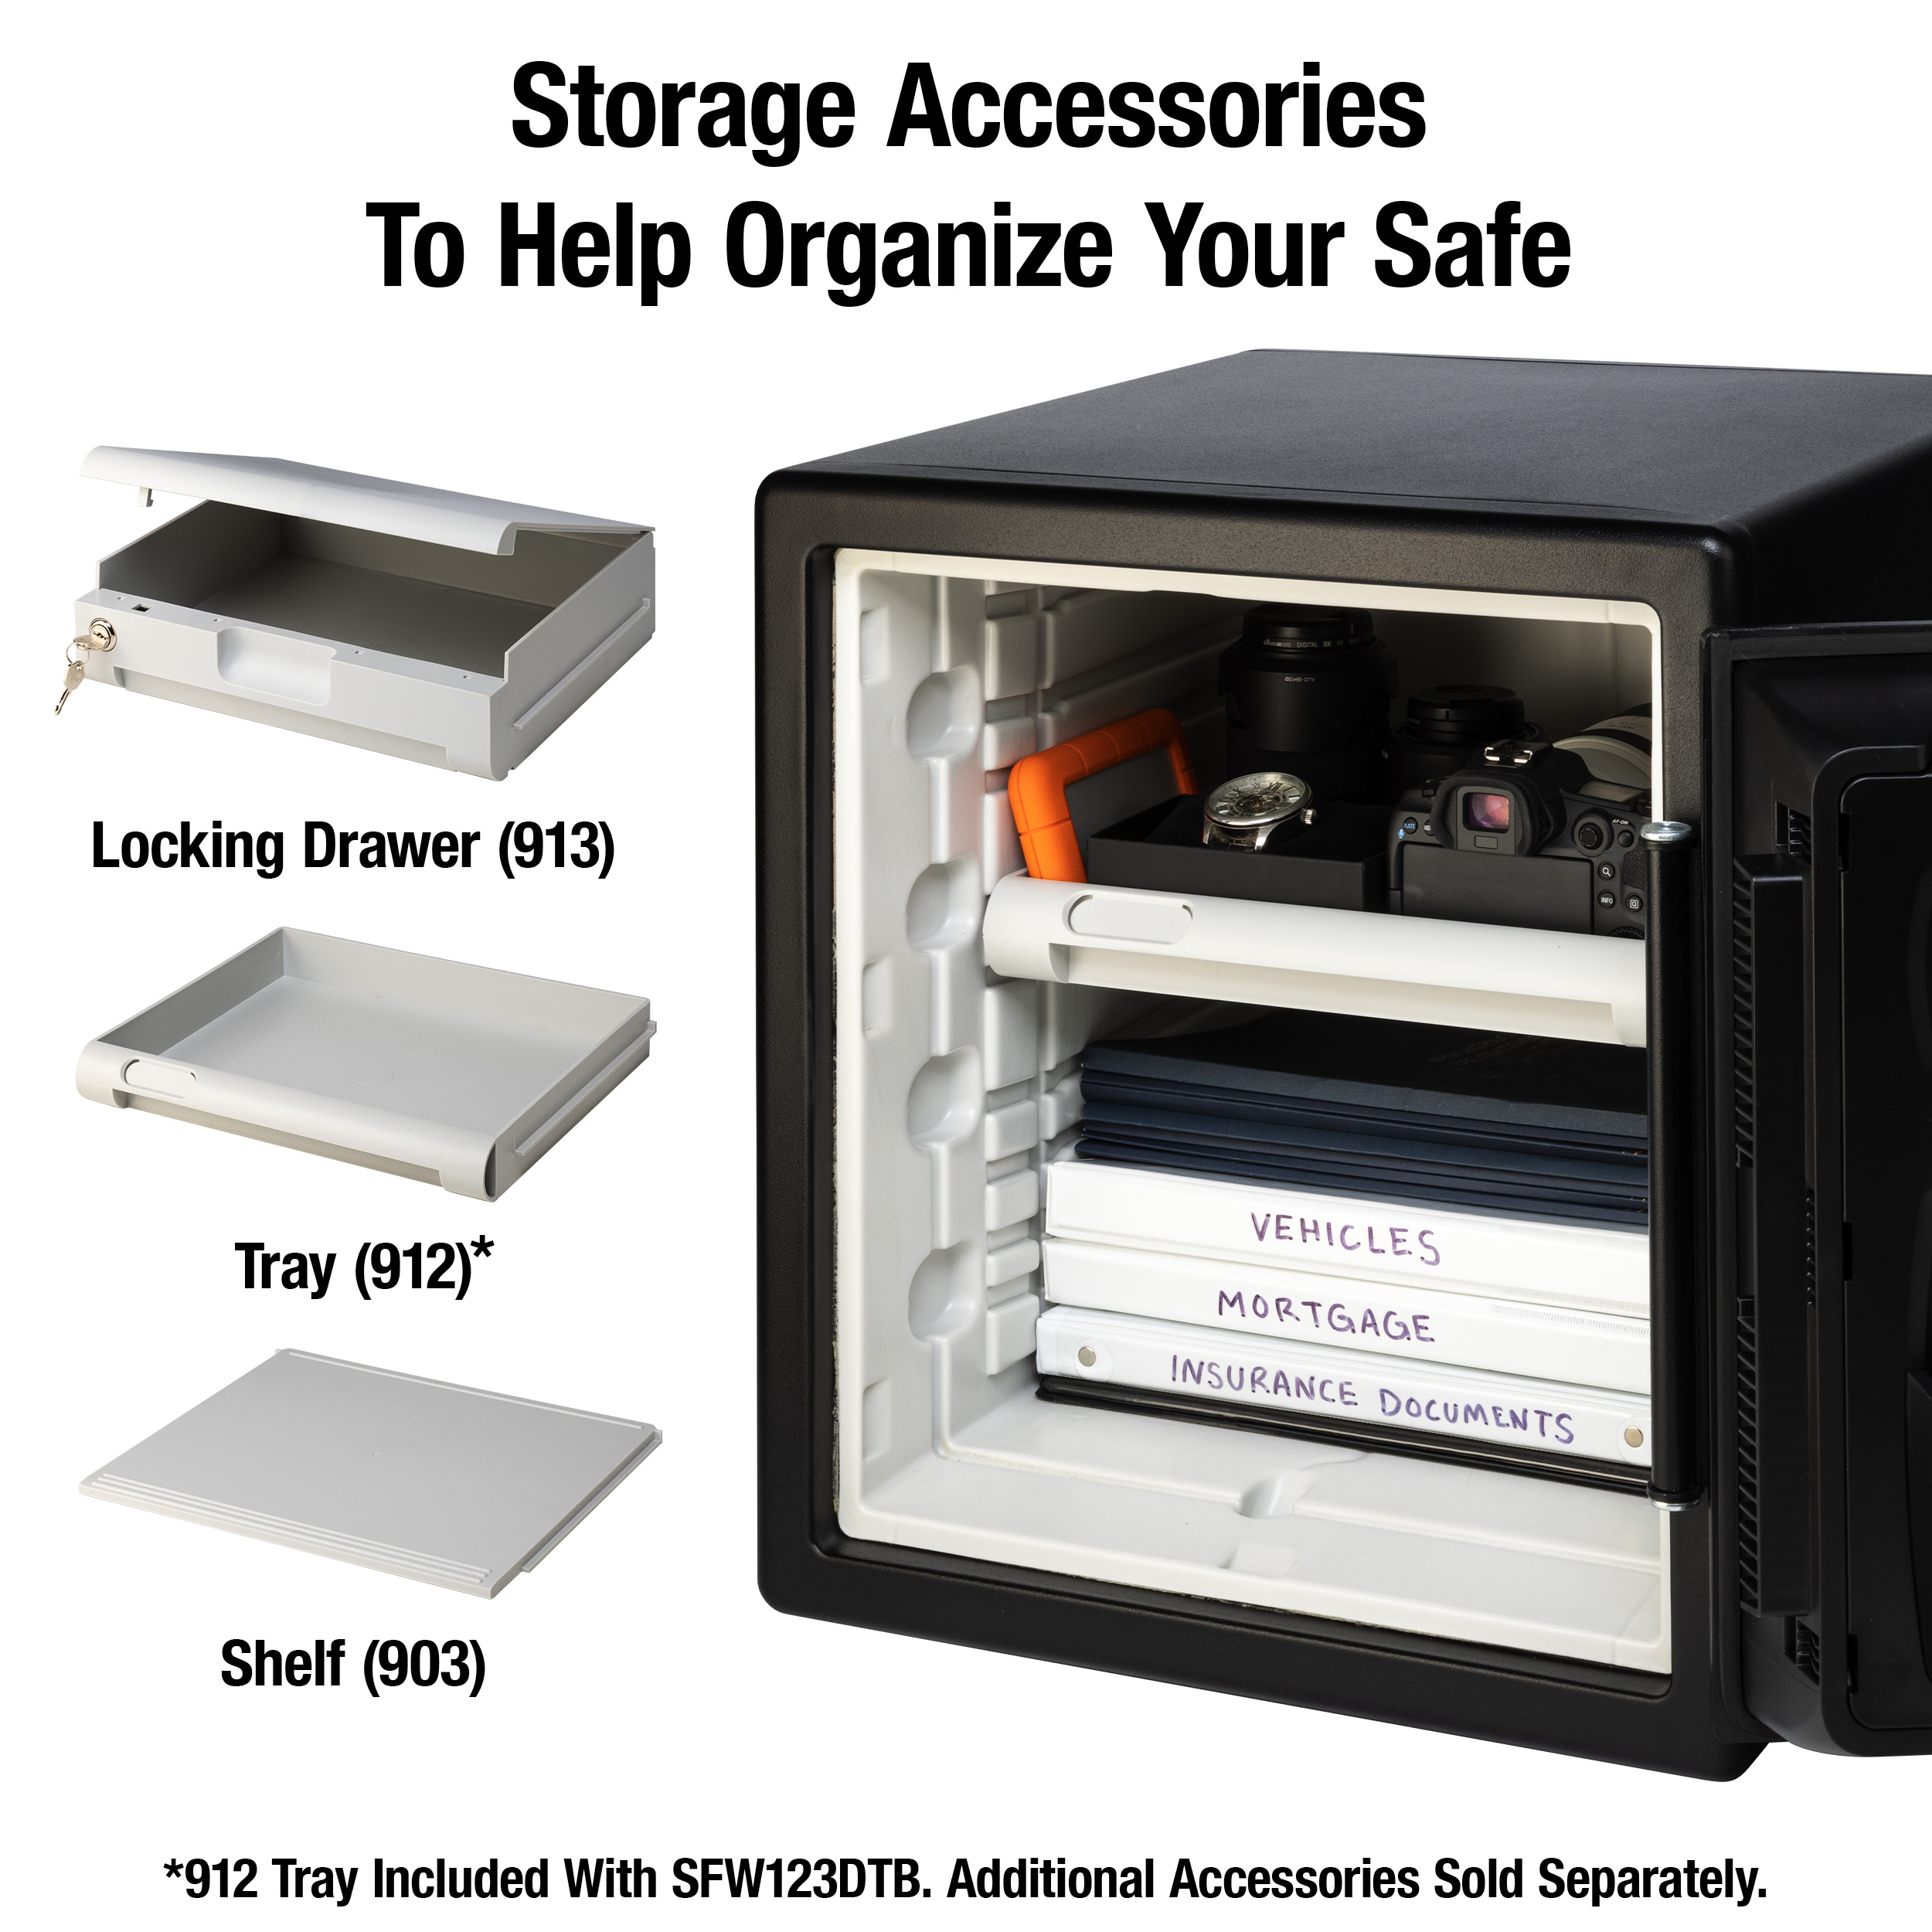 SentrySafe SFW123DTB Fire-Resistant and Water-Resistant Safe with Combination Lock, 1.23 cu. ft. - image 3 of 8